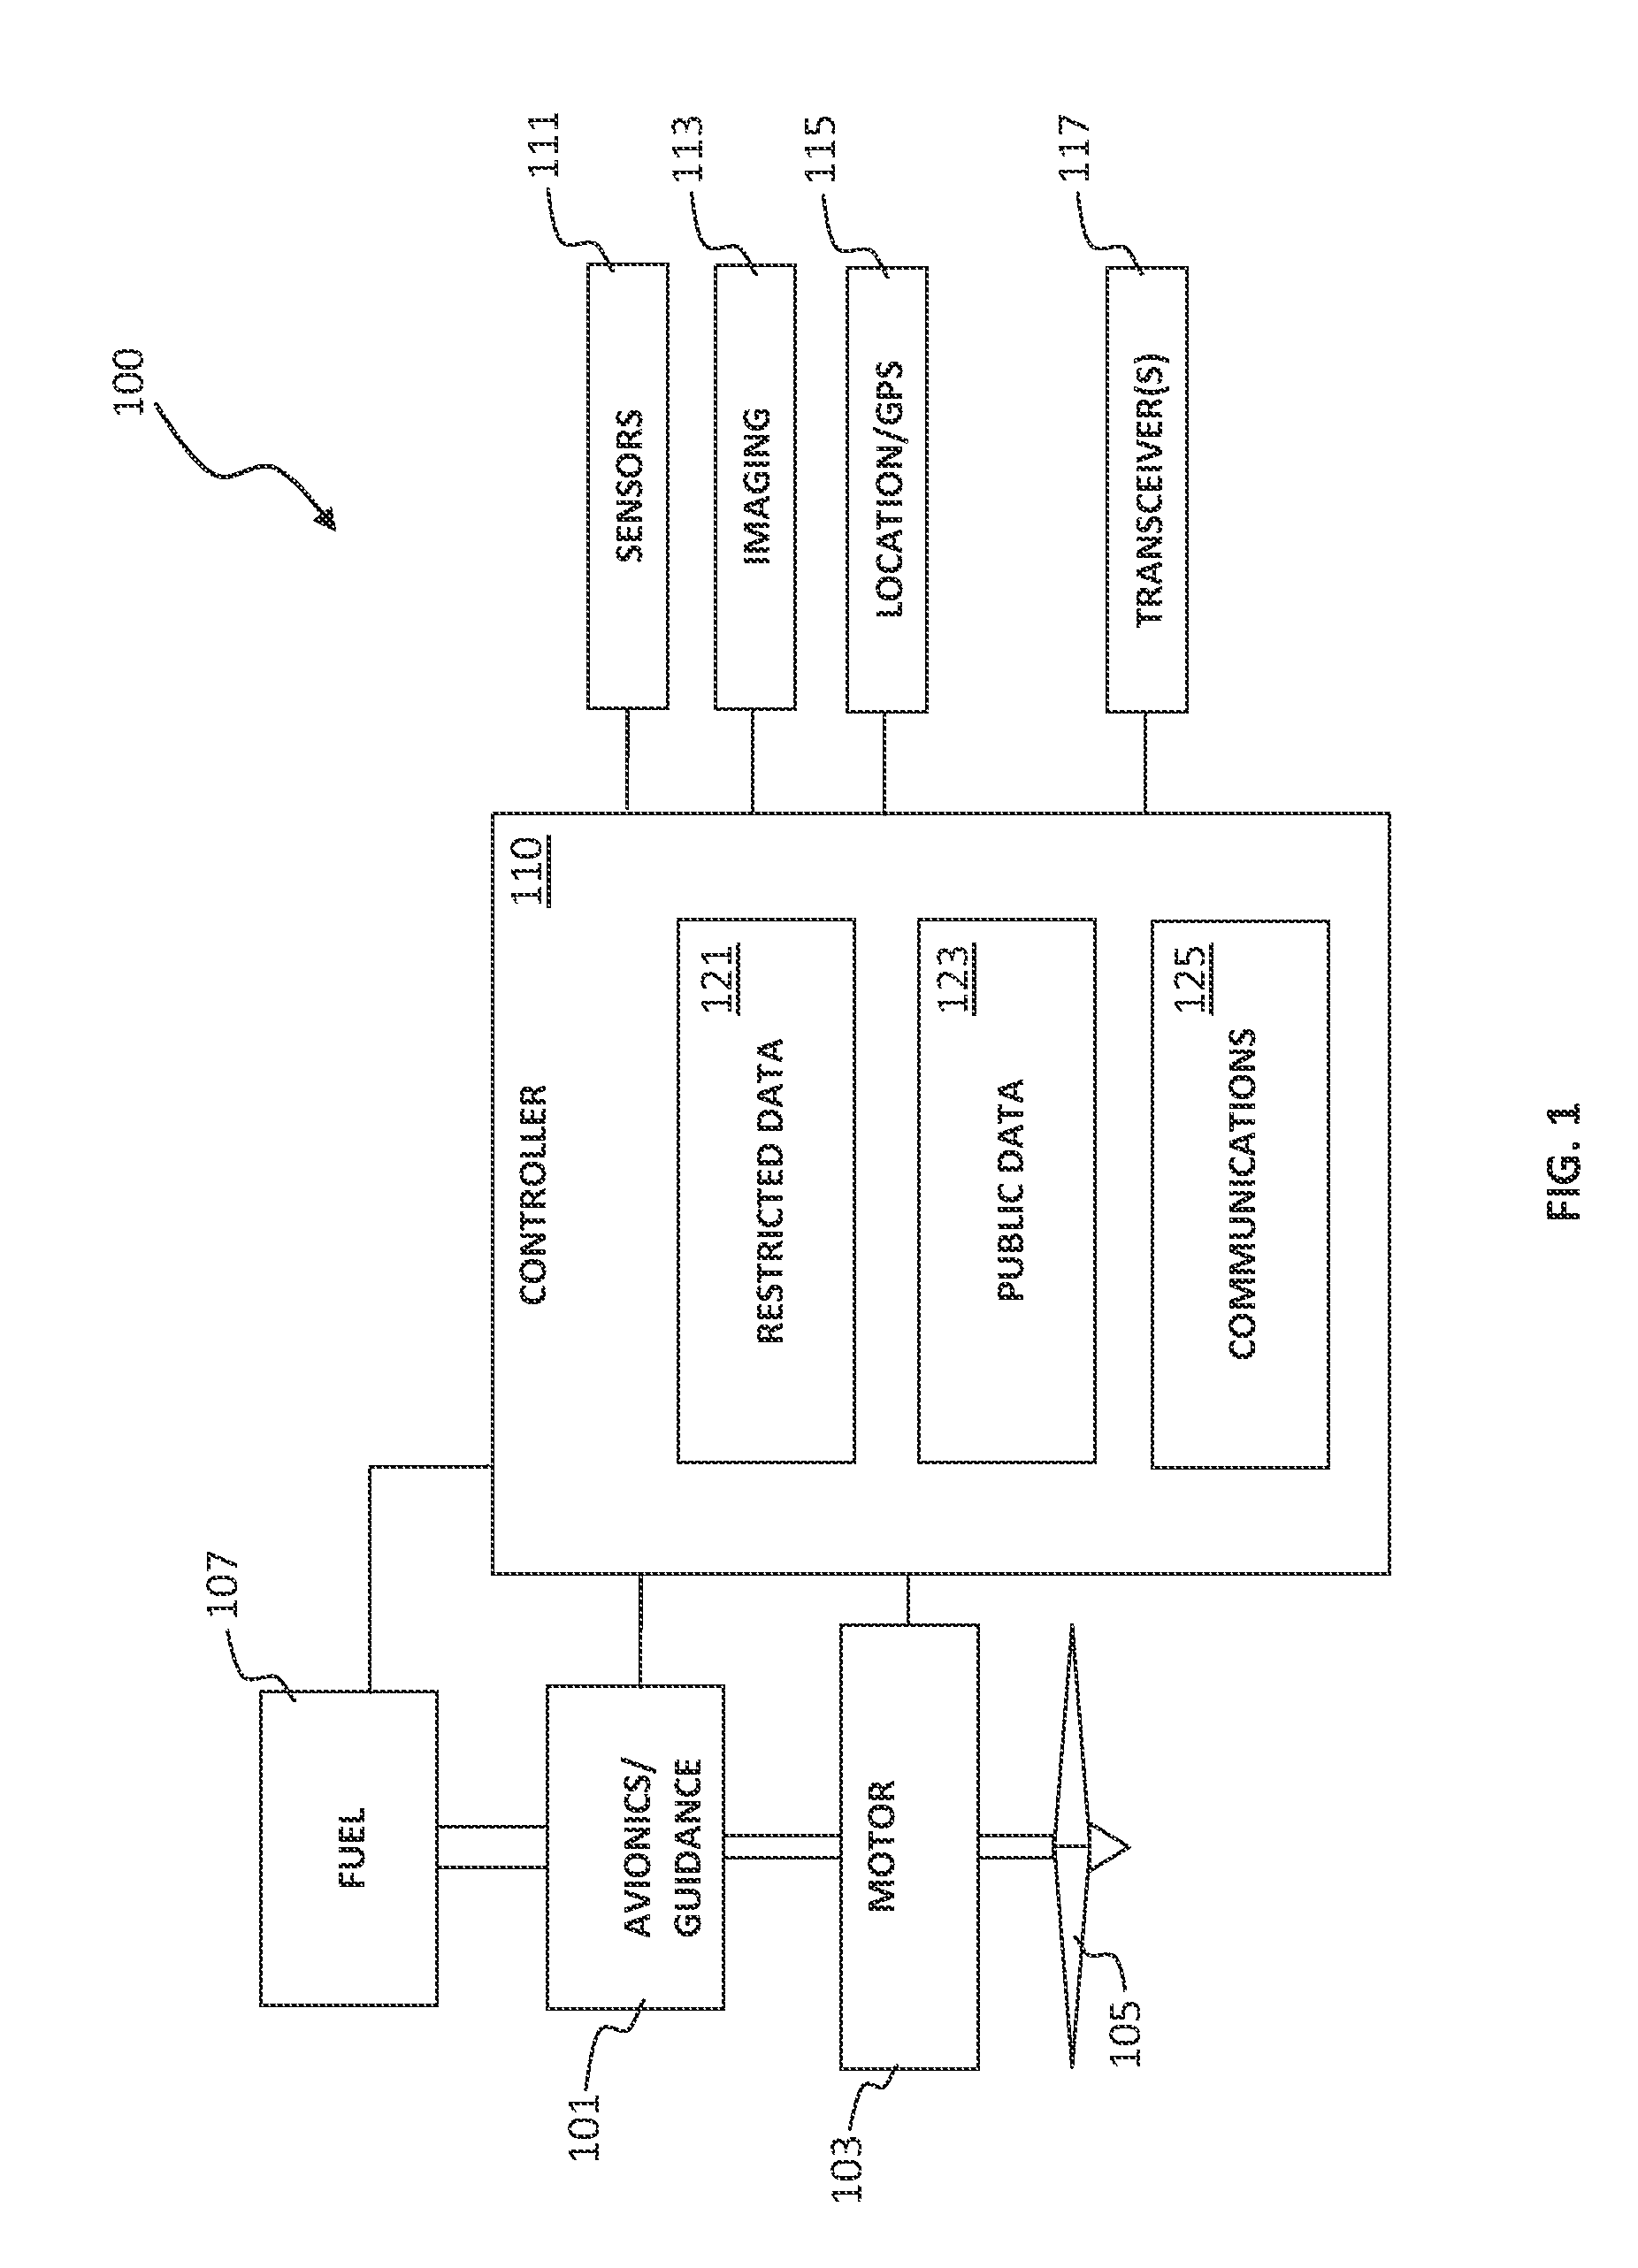 Unmanned vehicle civil communications systems and methods